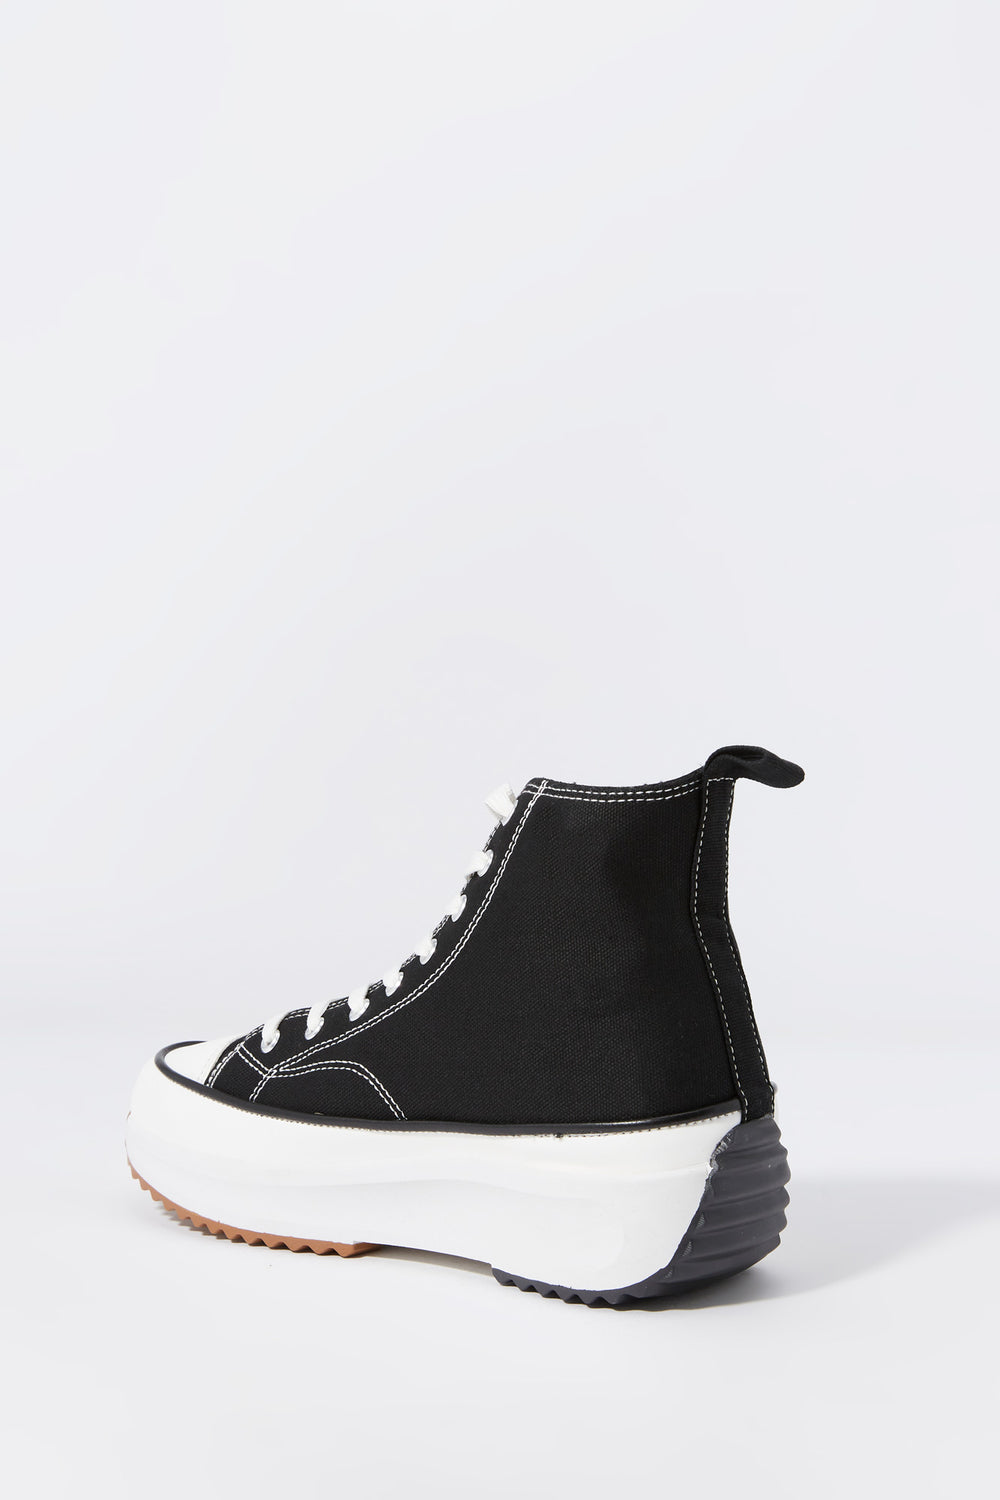 Spiked Sole Lace-Up High Top Sneaker Spiked Sole Lace-Up High Top Sneaker 4